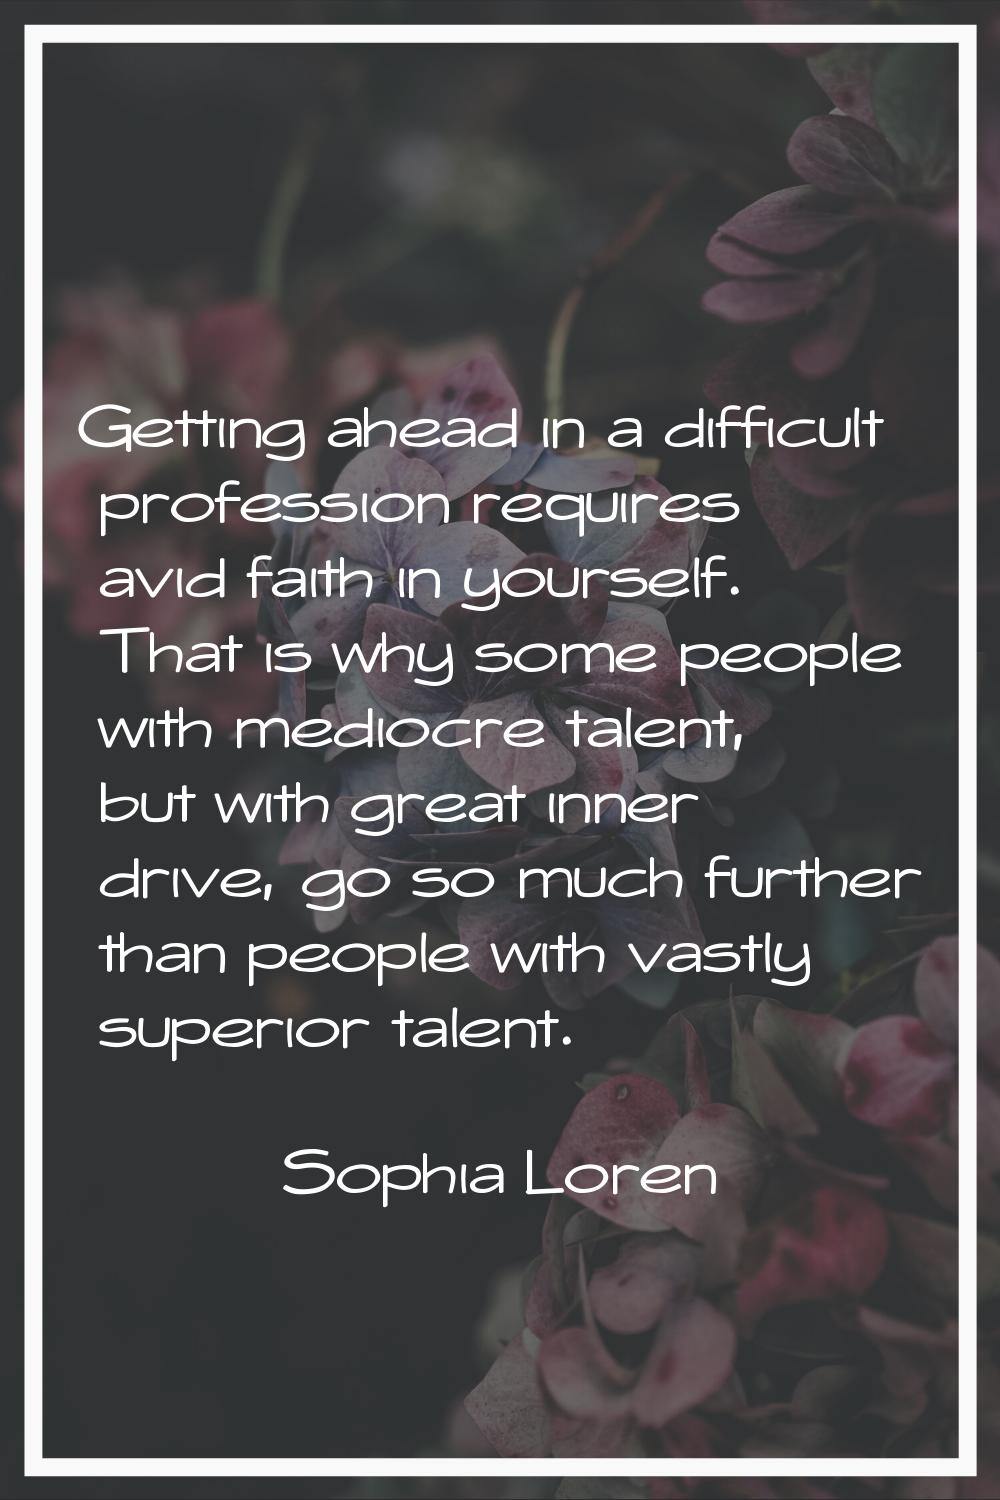 Getting ahead in a difficult profession requires avid faith in yourself. That is why some people wi